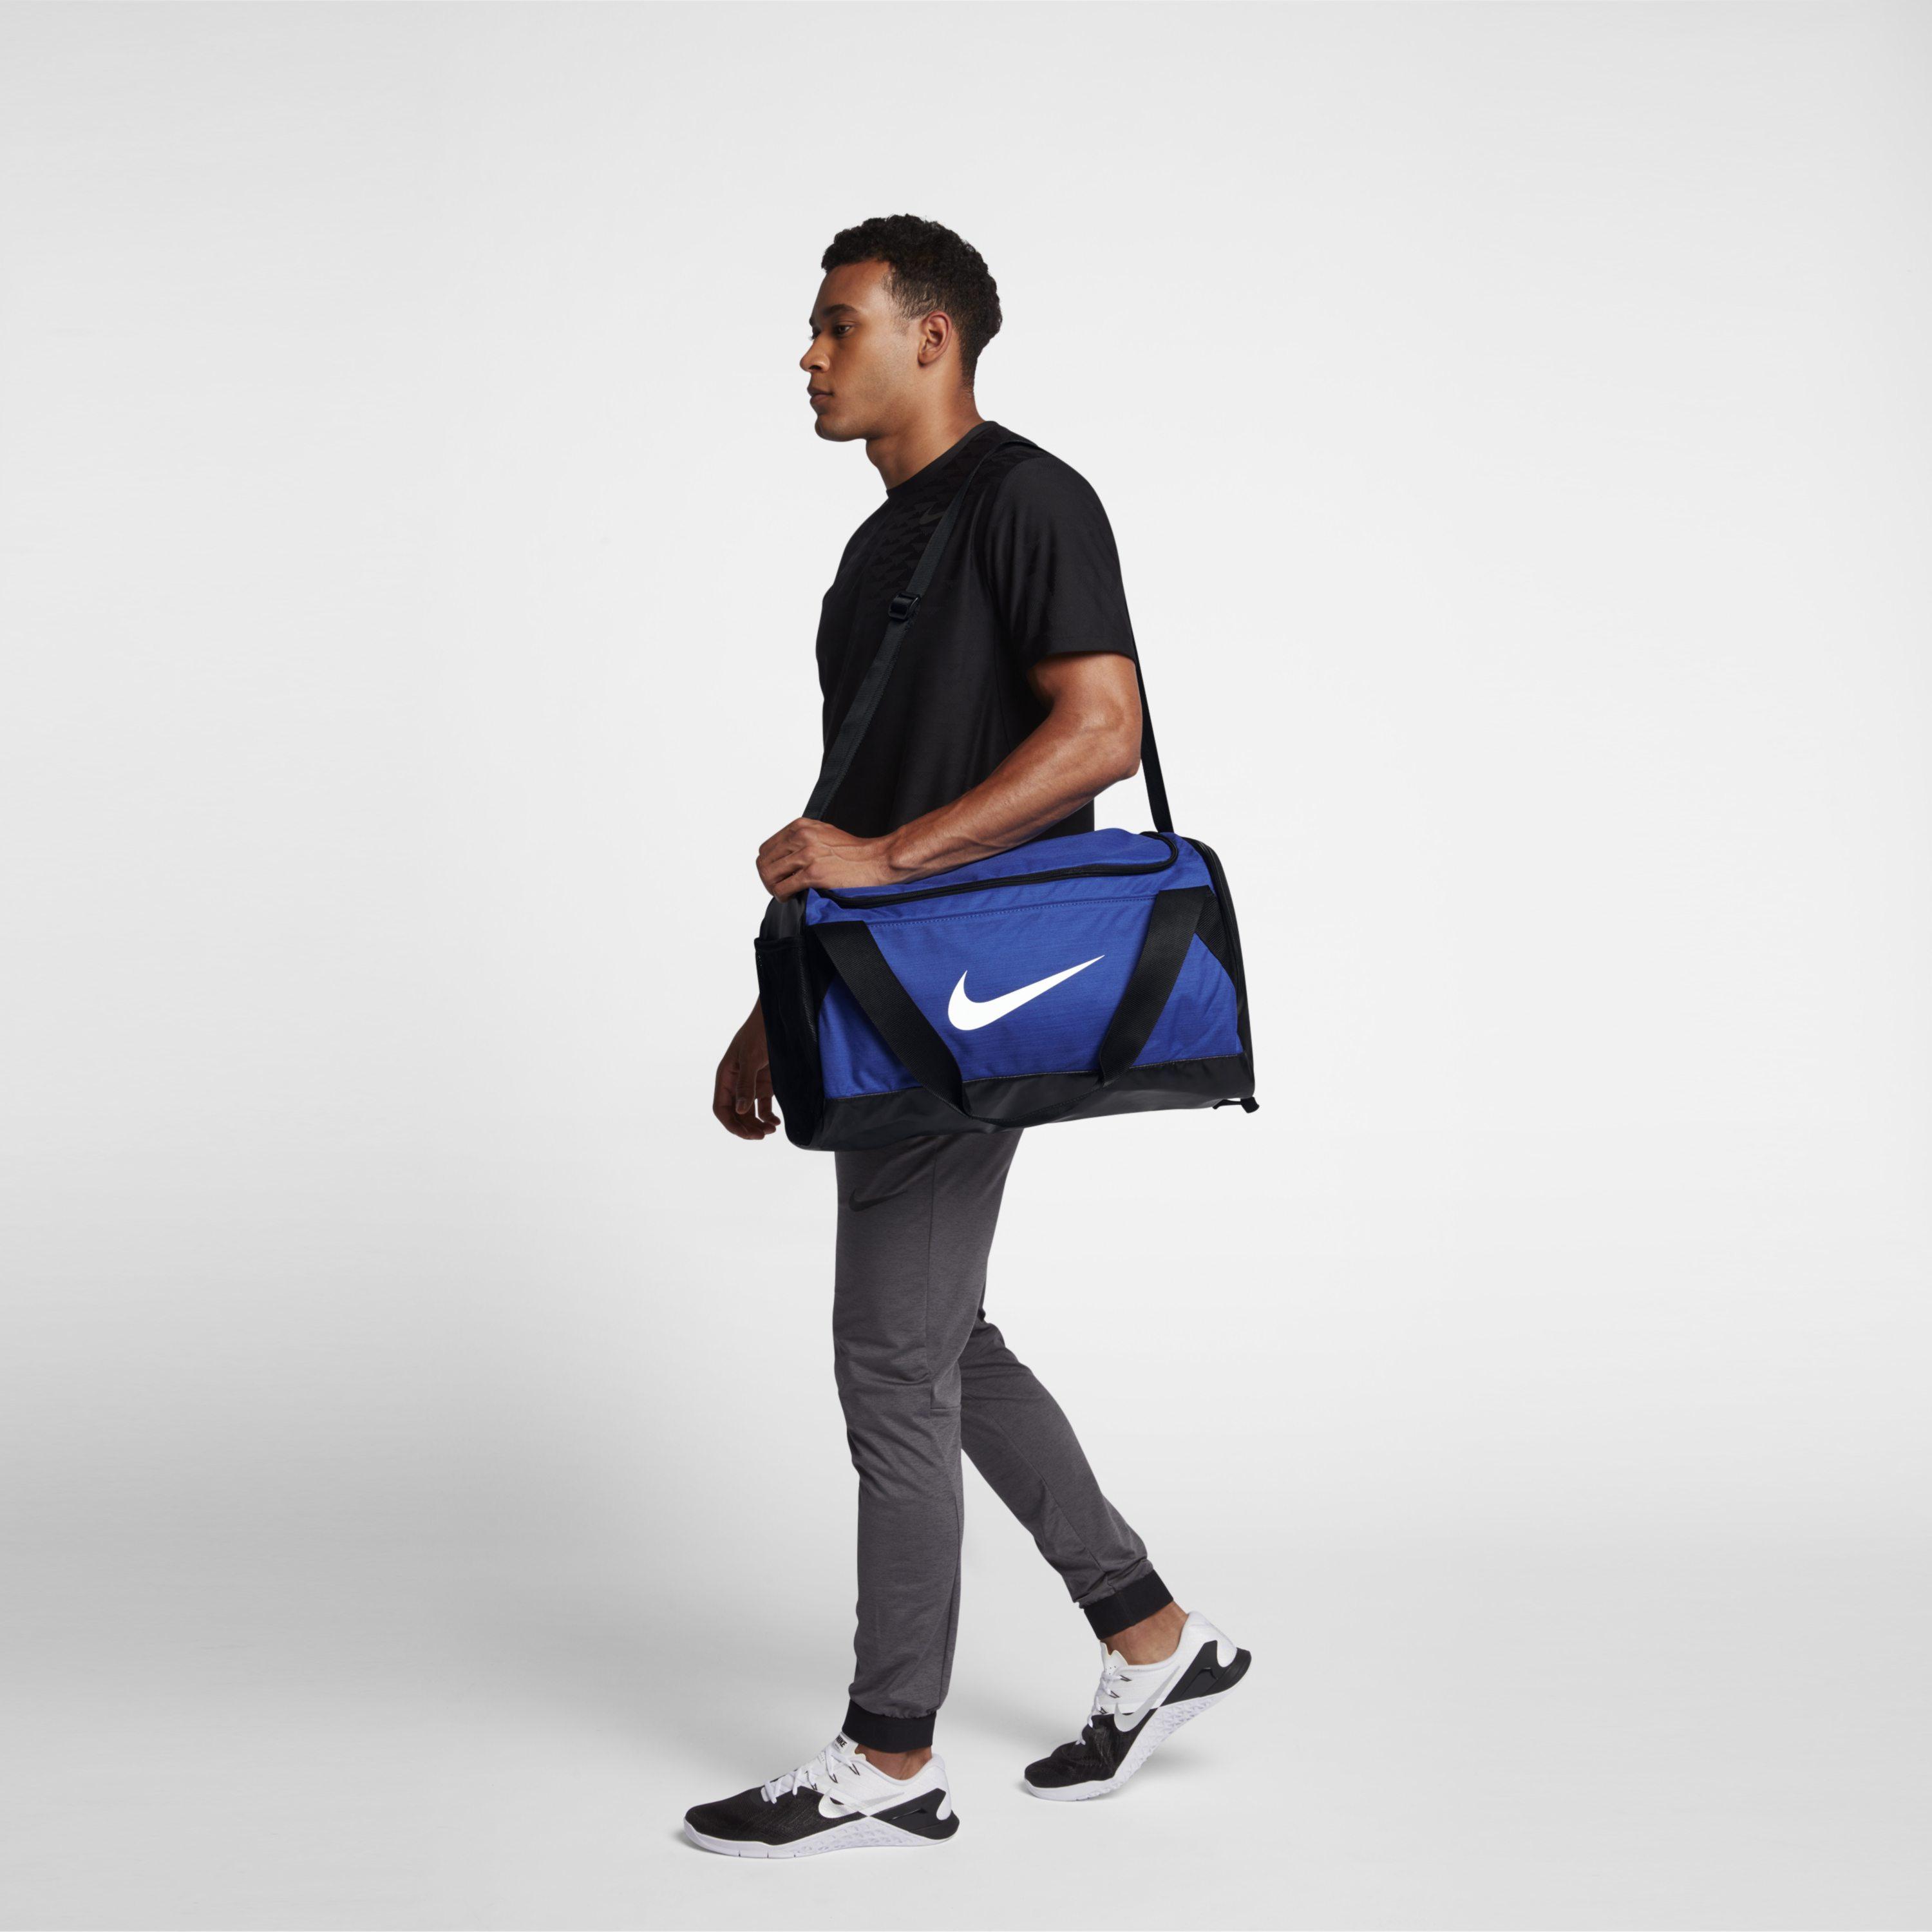 nike holdall small